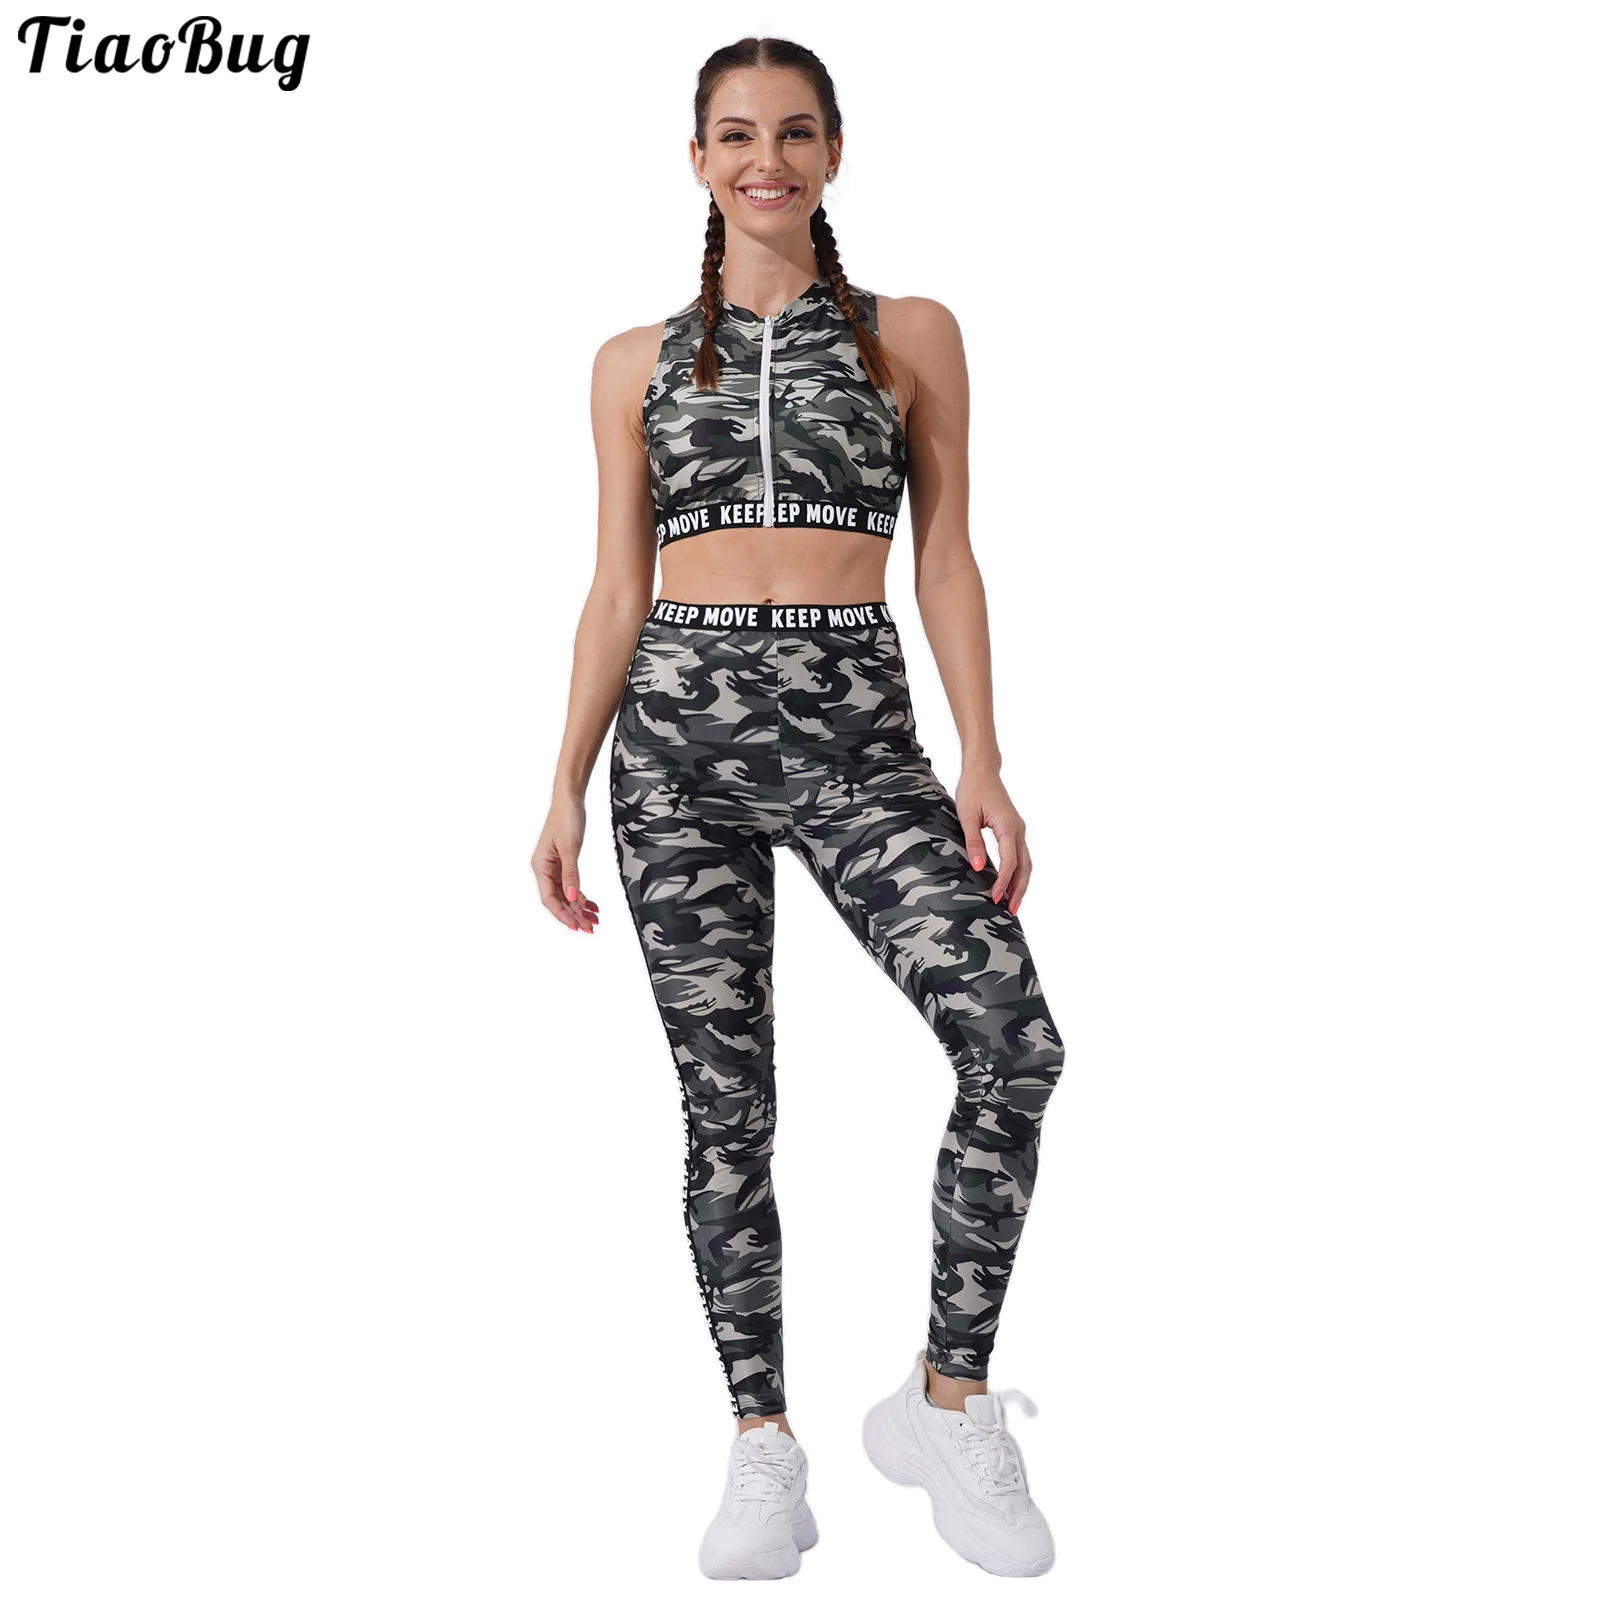 

TiaoBug Women Summer Clothes Set Sleeveless Round Neckline Zipper Front Racer Back Crop Padded Top With Leggings For Yoga Gym